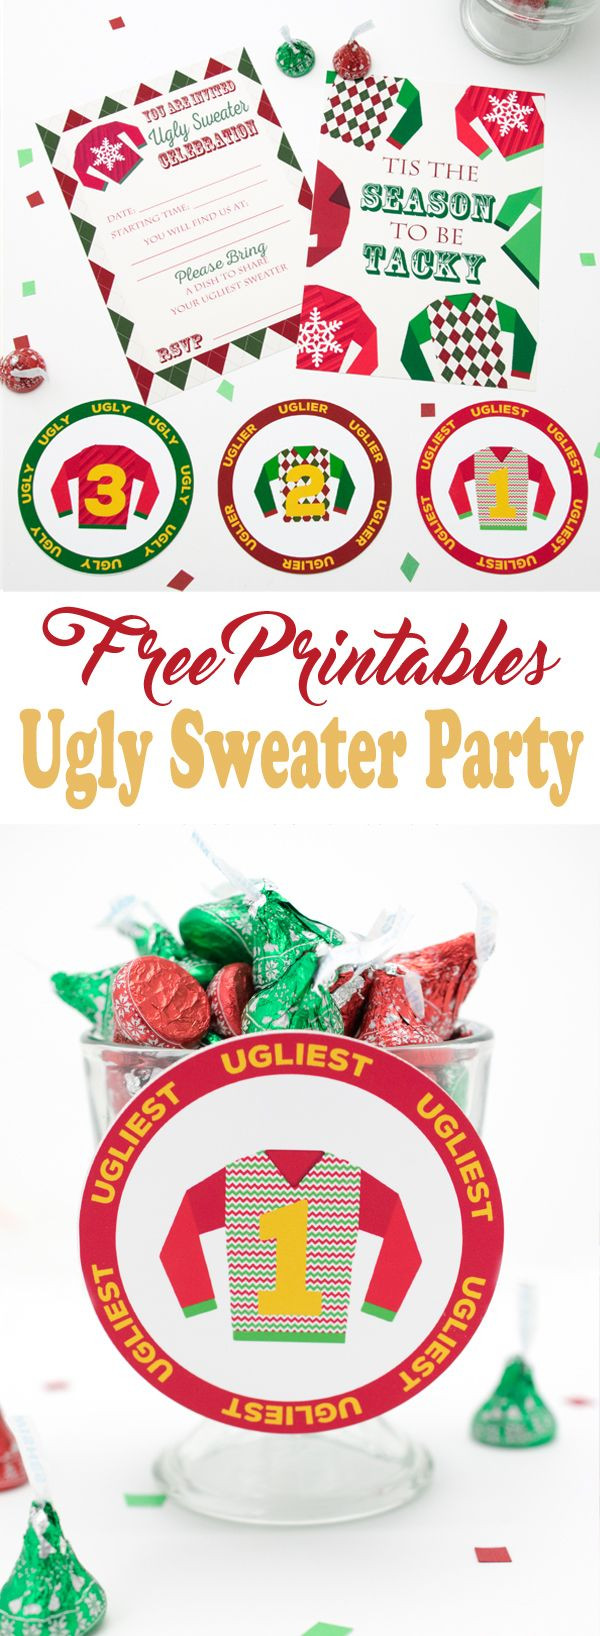 Christmas Party Contest Ideas
 Ugly Sweater Party Invitations and Medals Free Printable